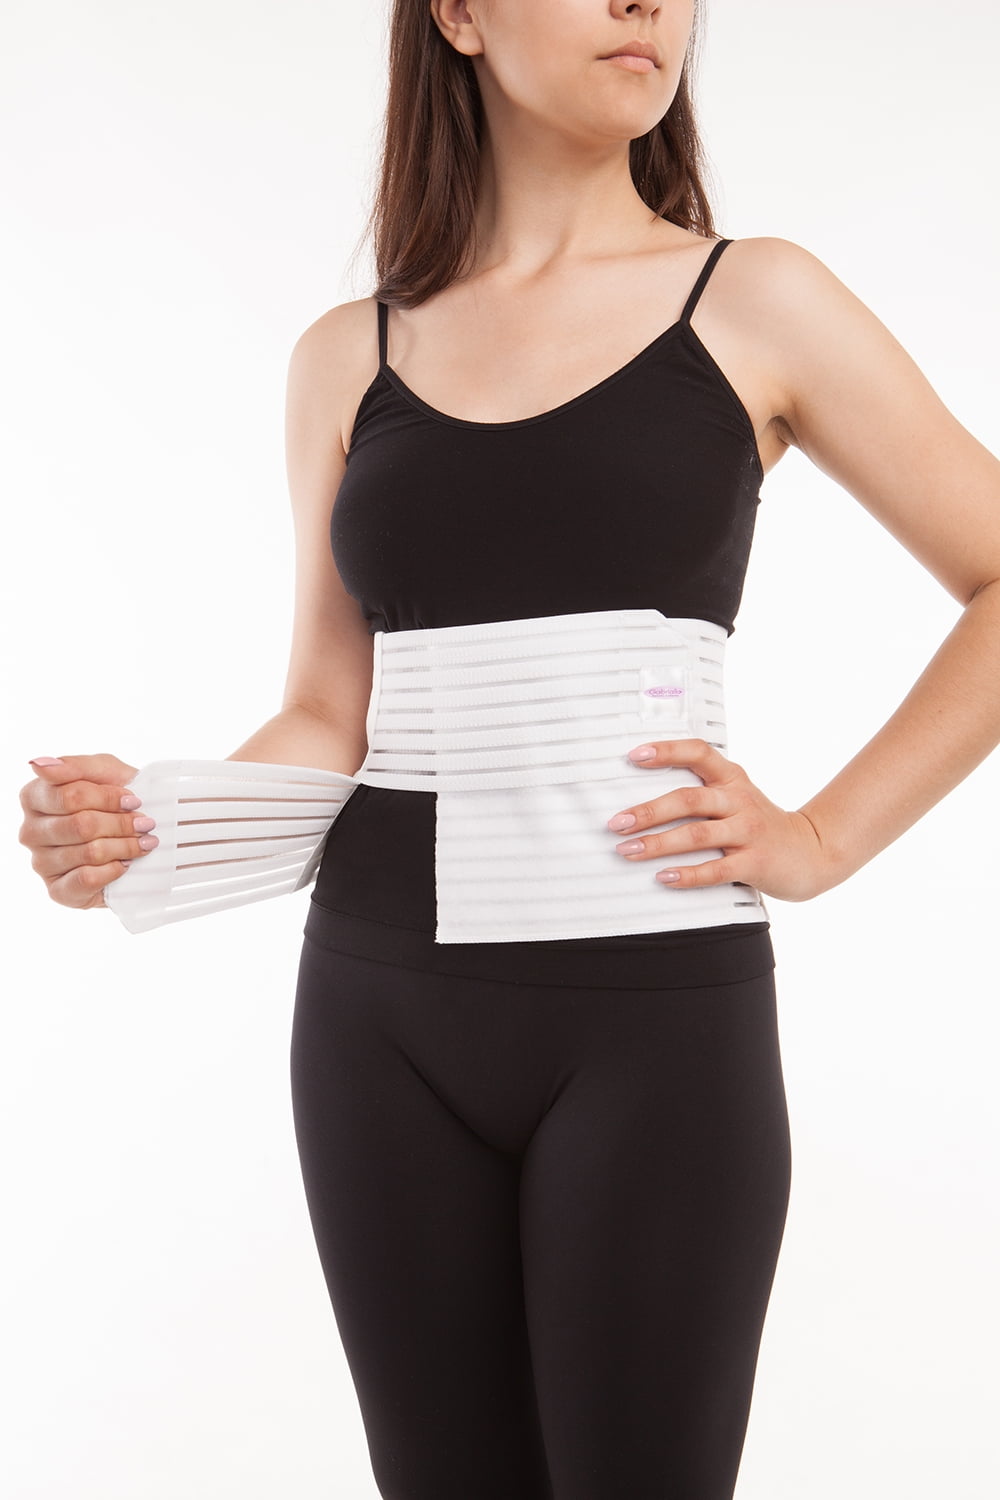 GABRIALLA Breathable Abdomen Slimming Postpartum Belly Recovery Wrap Binder  for Women: AB-208(W) M